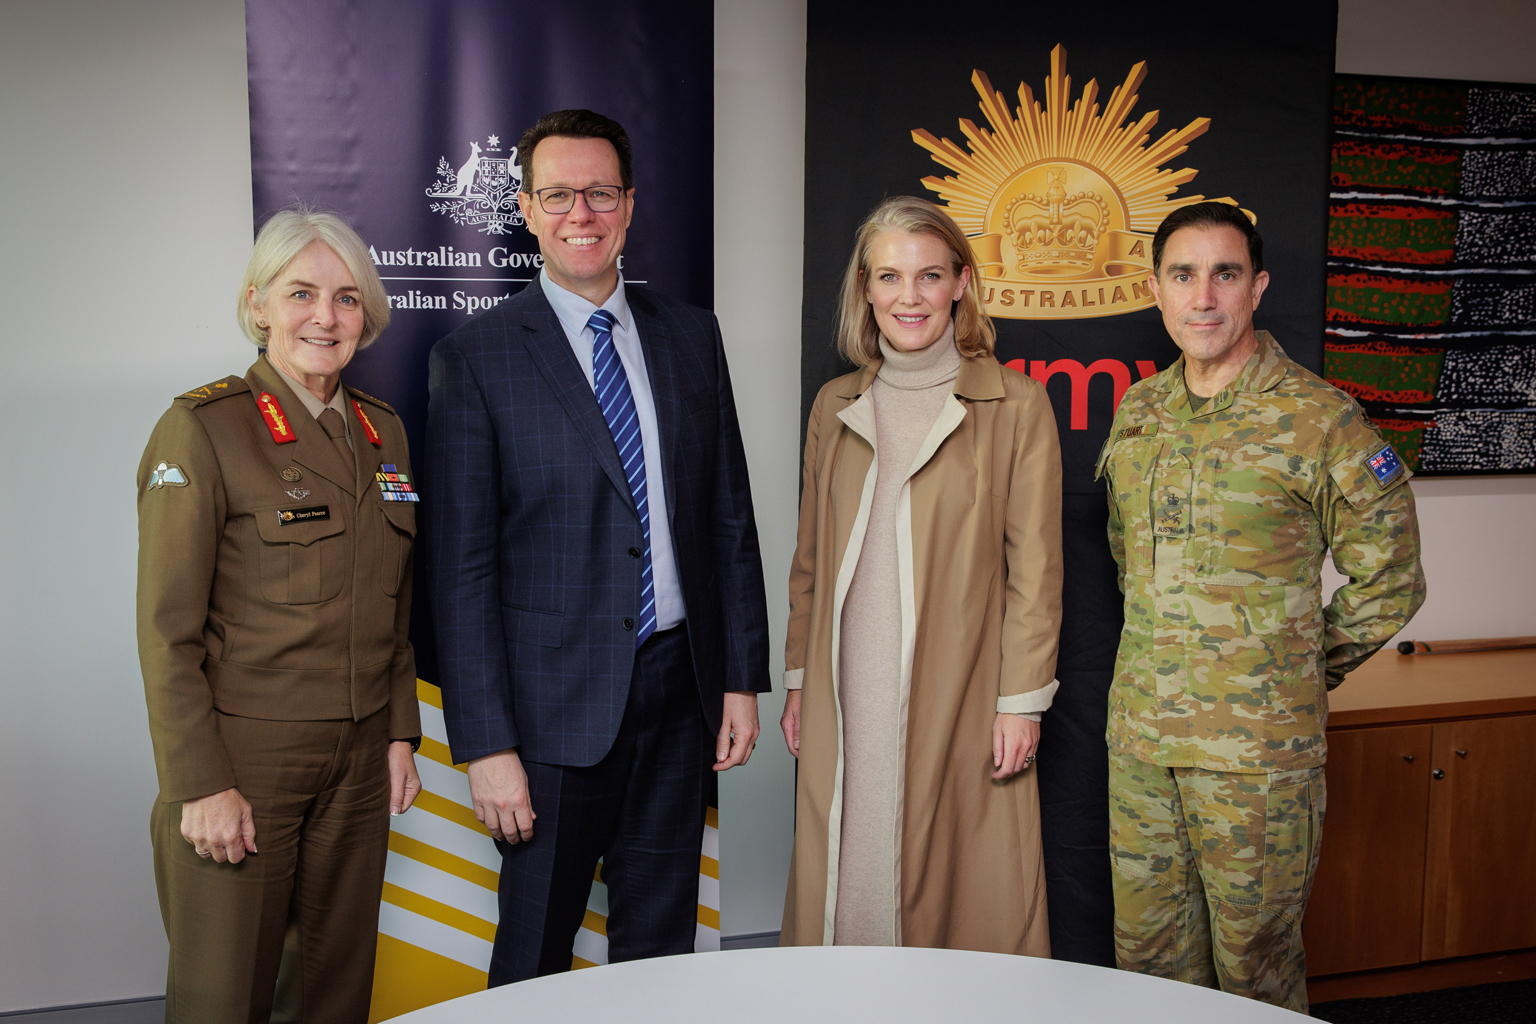 Four representatives from the Australian Army and the ASC standing together.